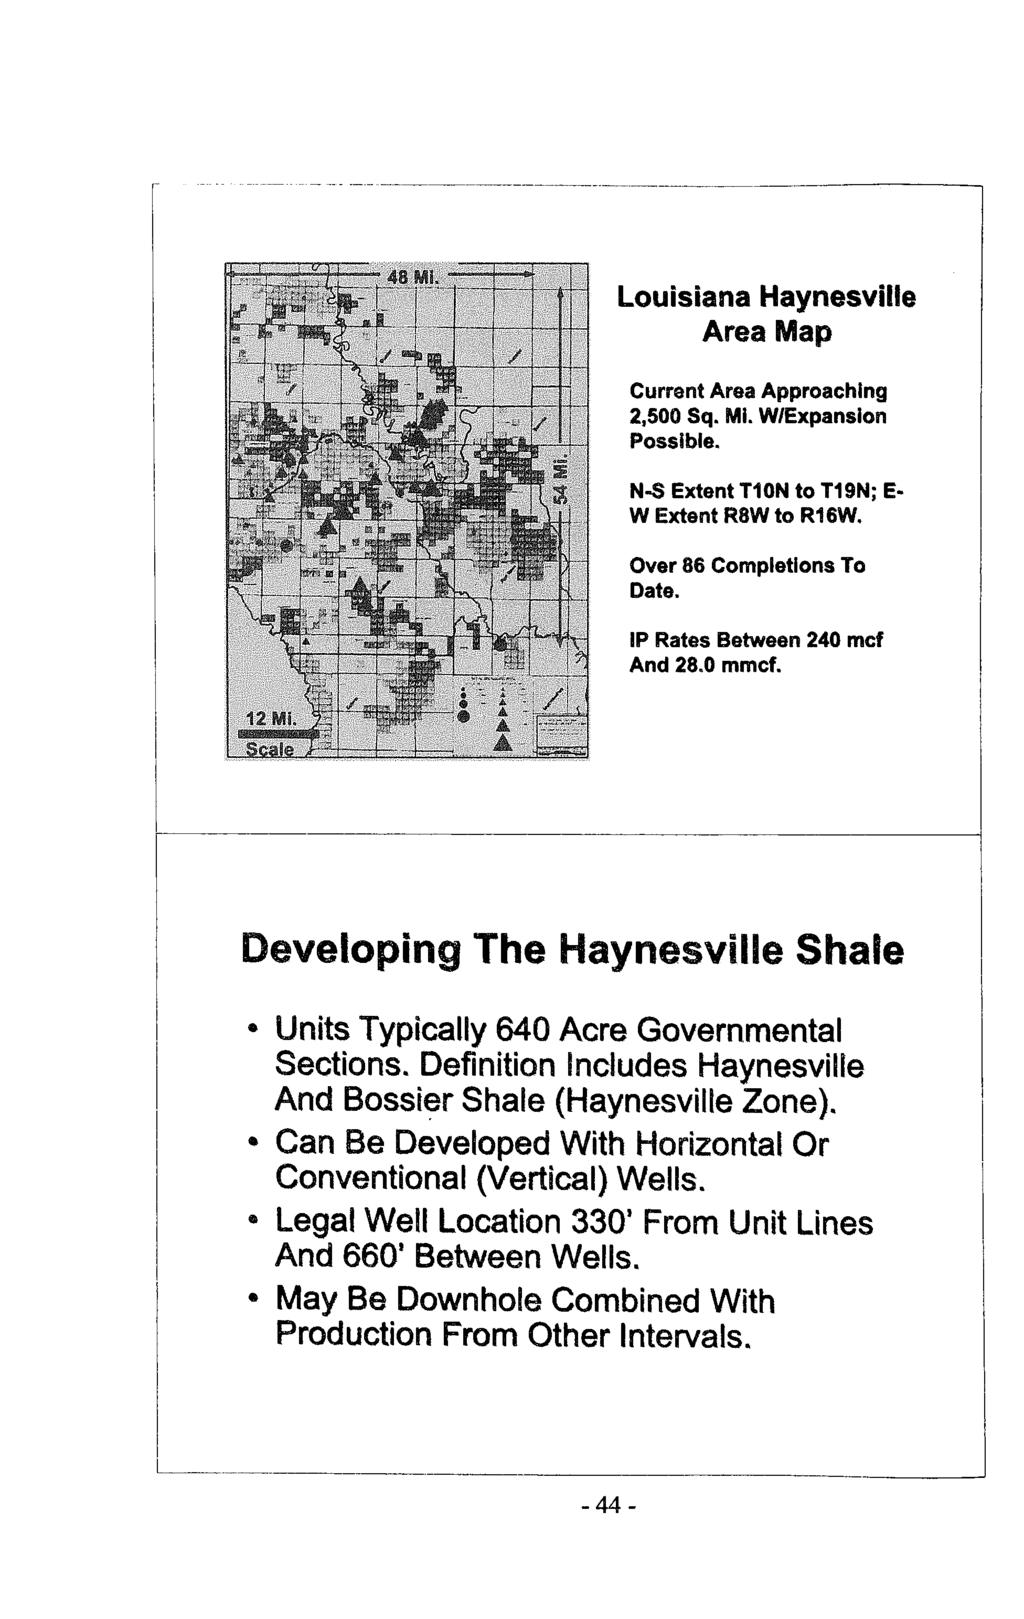 Annual Institute on Mineral Law, Vol. 56 [2009], Art. 6 Louisiana Haynesville Area Map Current Area Approaching 2,500 Sq. Mi. W/Expansion Possible. N-S Extent T1ON to TI9N; E- W Extent R8W to R16W.